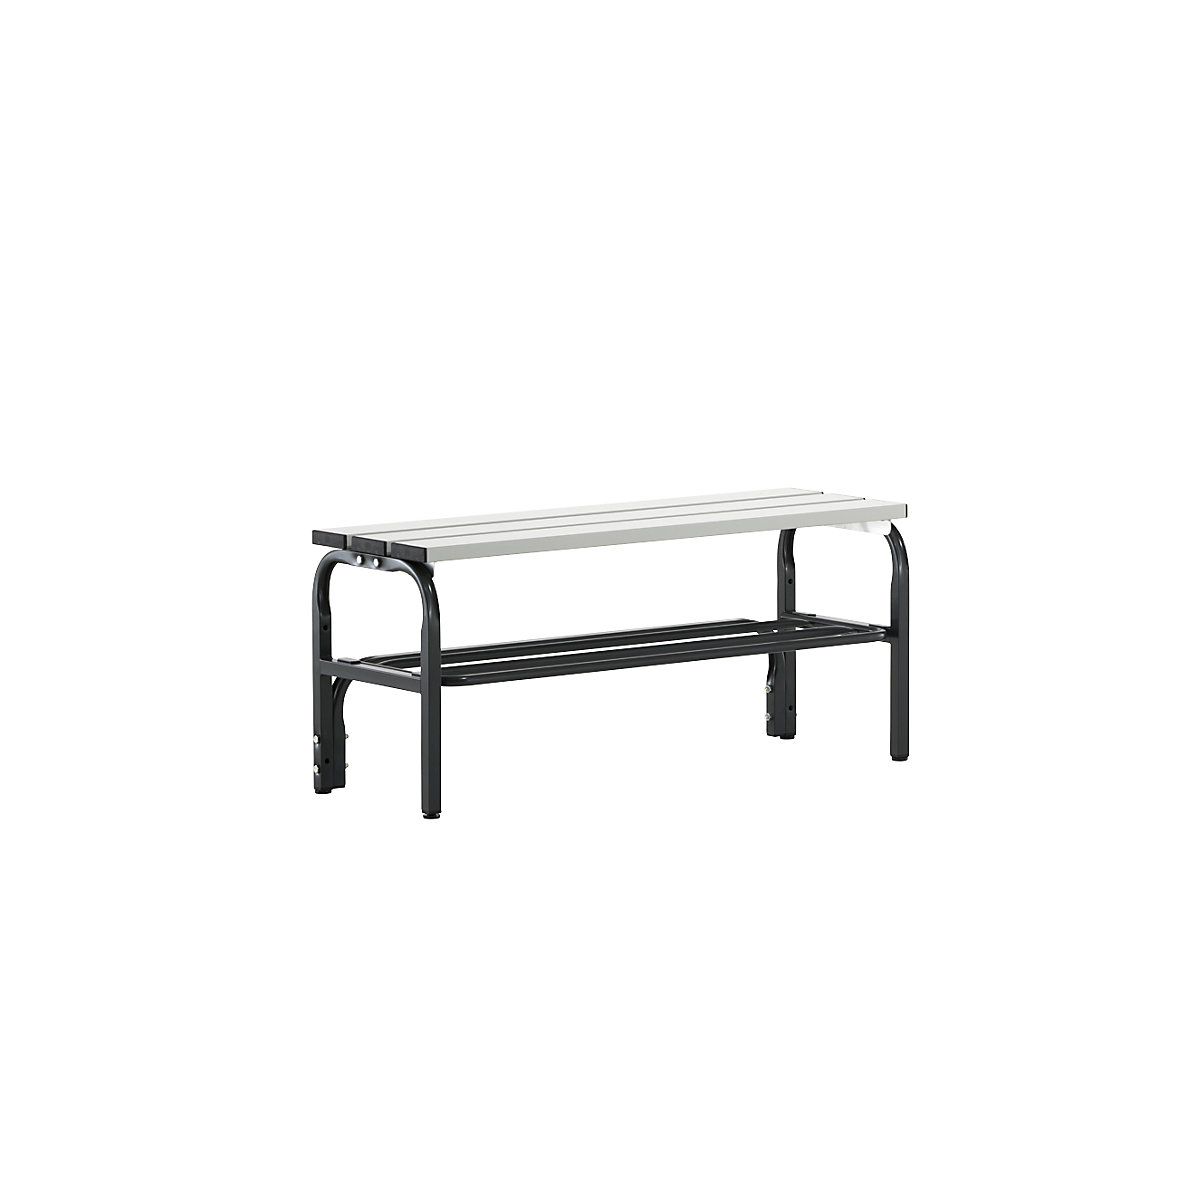 Sypro – Changing room bench with aluminium slats, HxD 450 x 350 mm, length 1015 mm, charcoal, shoe rack